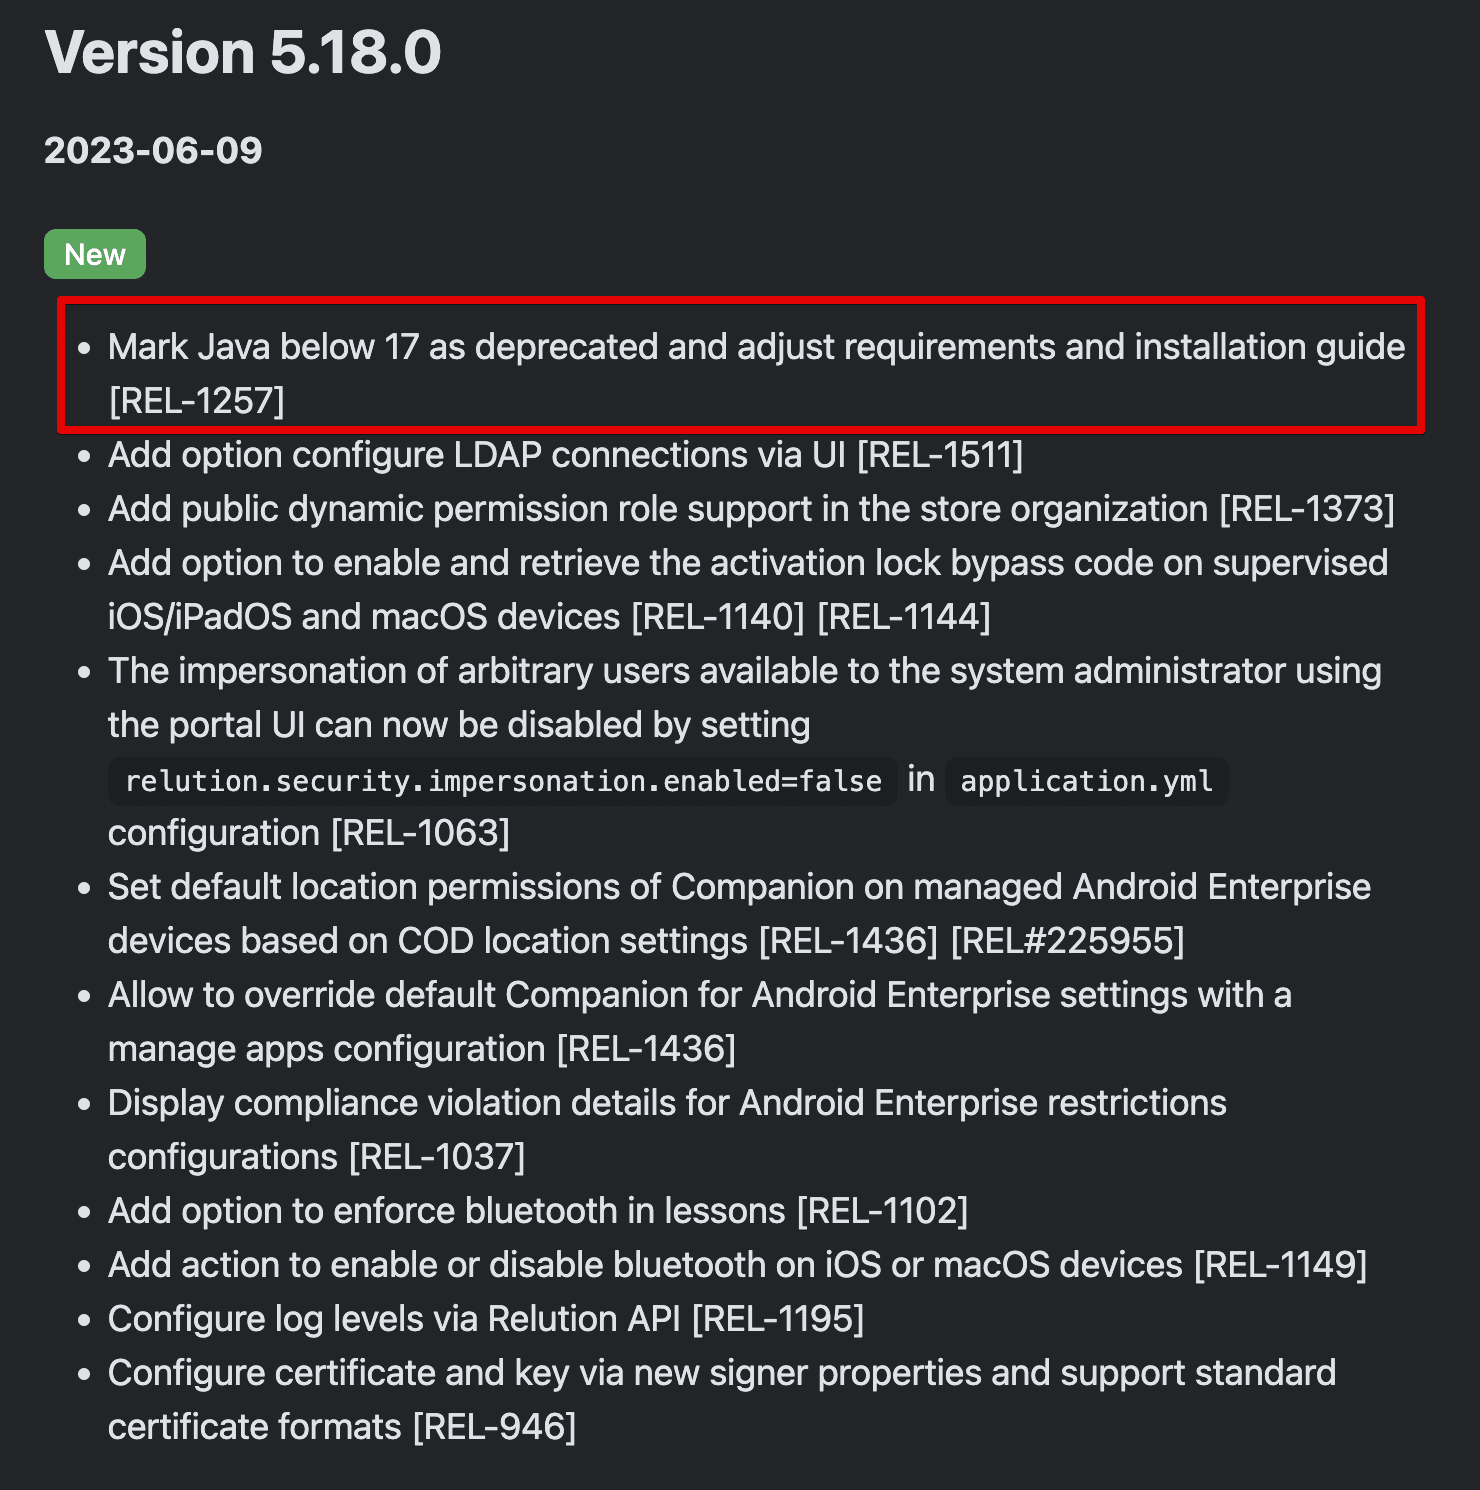 Figure 5: Our analysis of the changelog published by Relution indicated that versions below Java 17 were deprecated in version 5.18.0 published on June 6th, 2023.